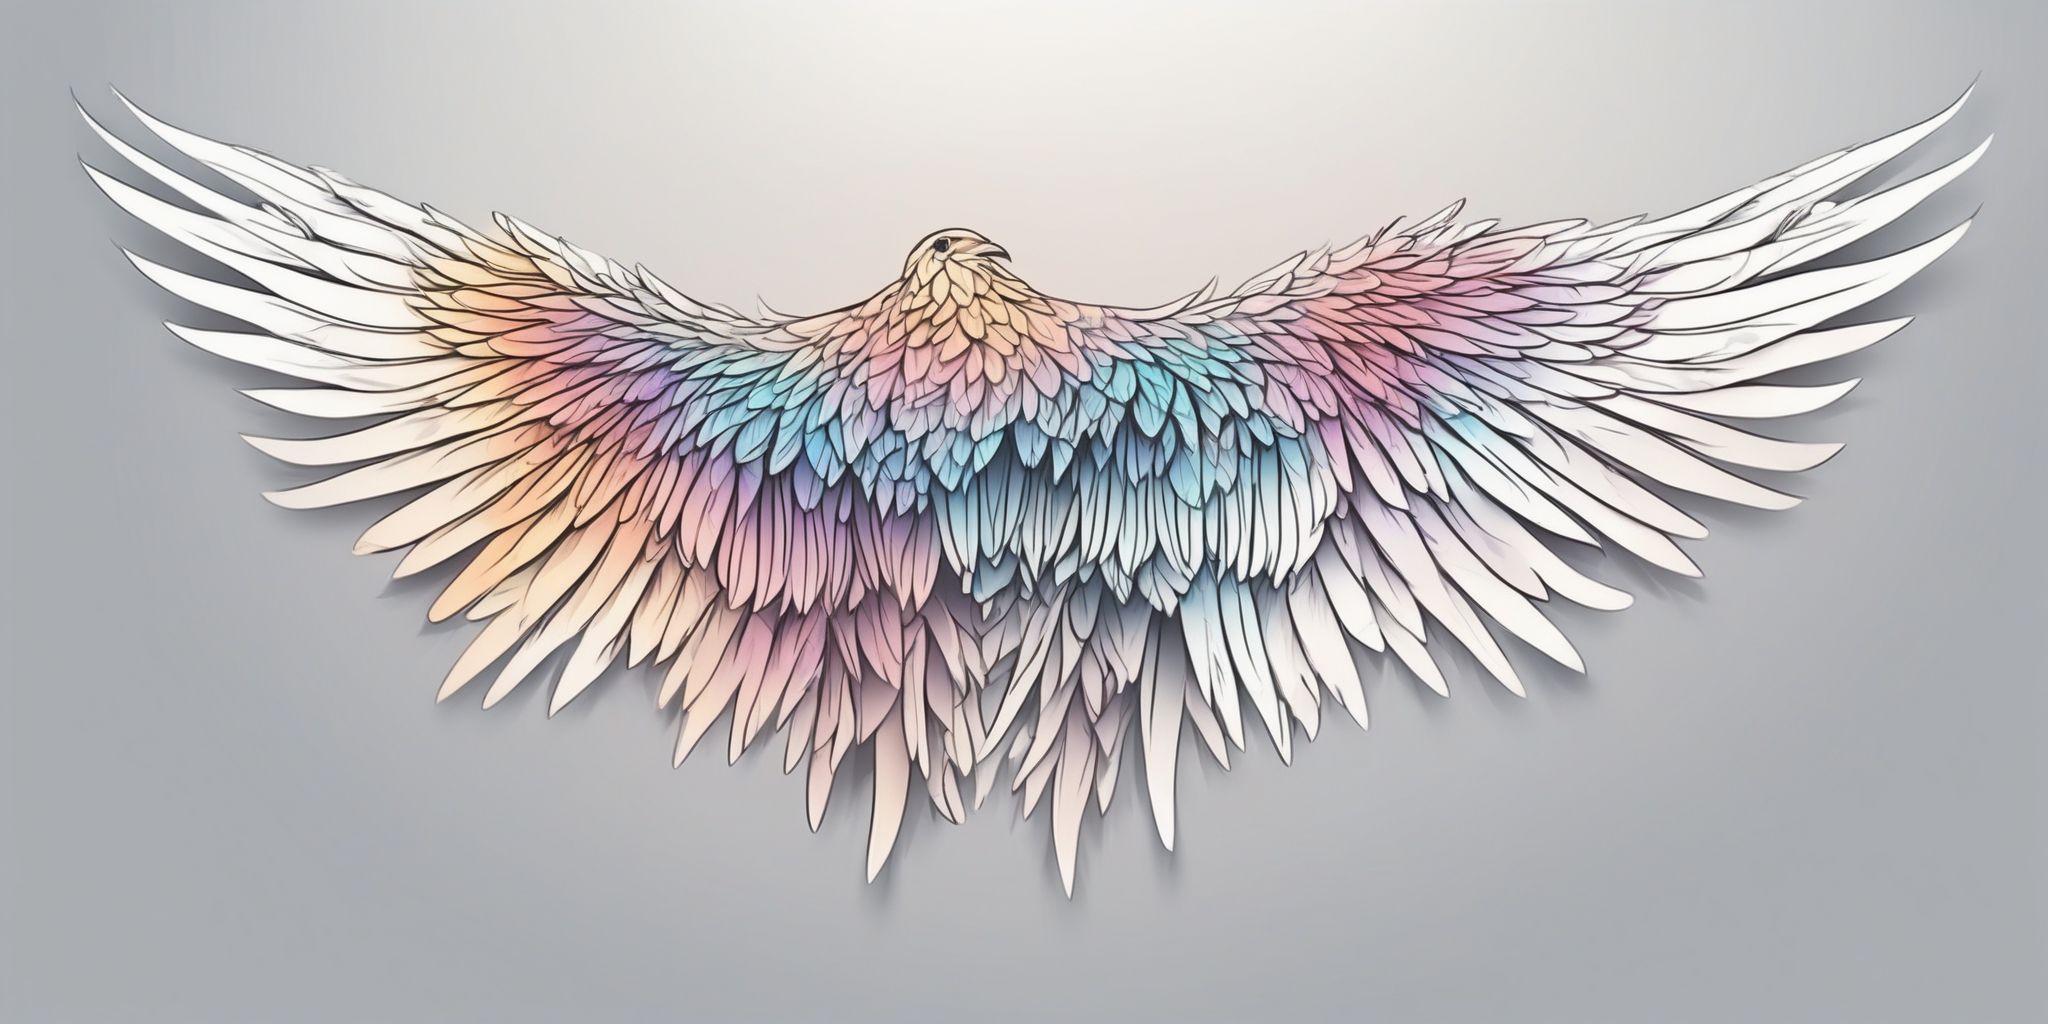 bird's wings in illustration style with gradients and white background